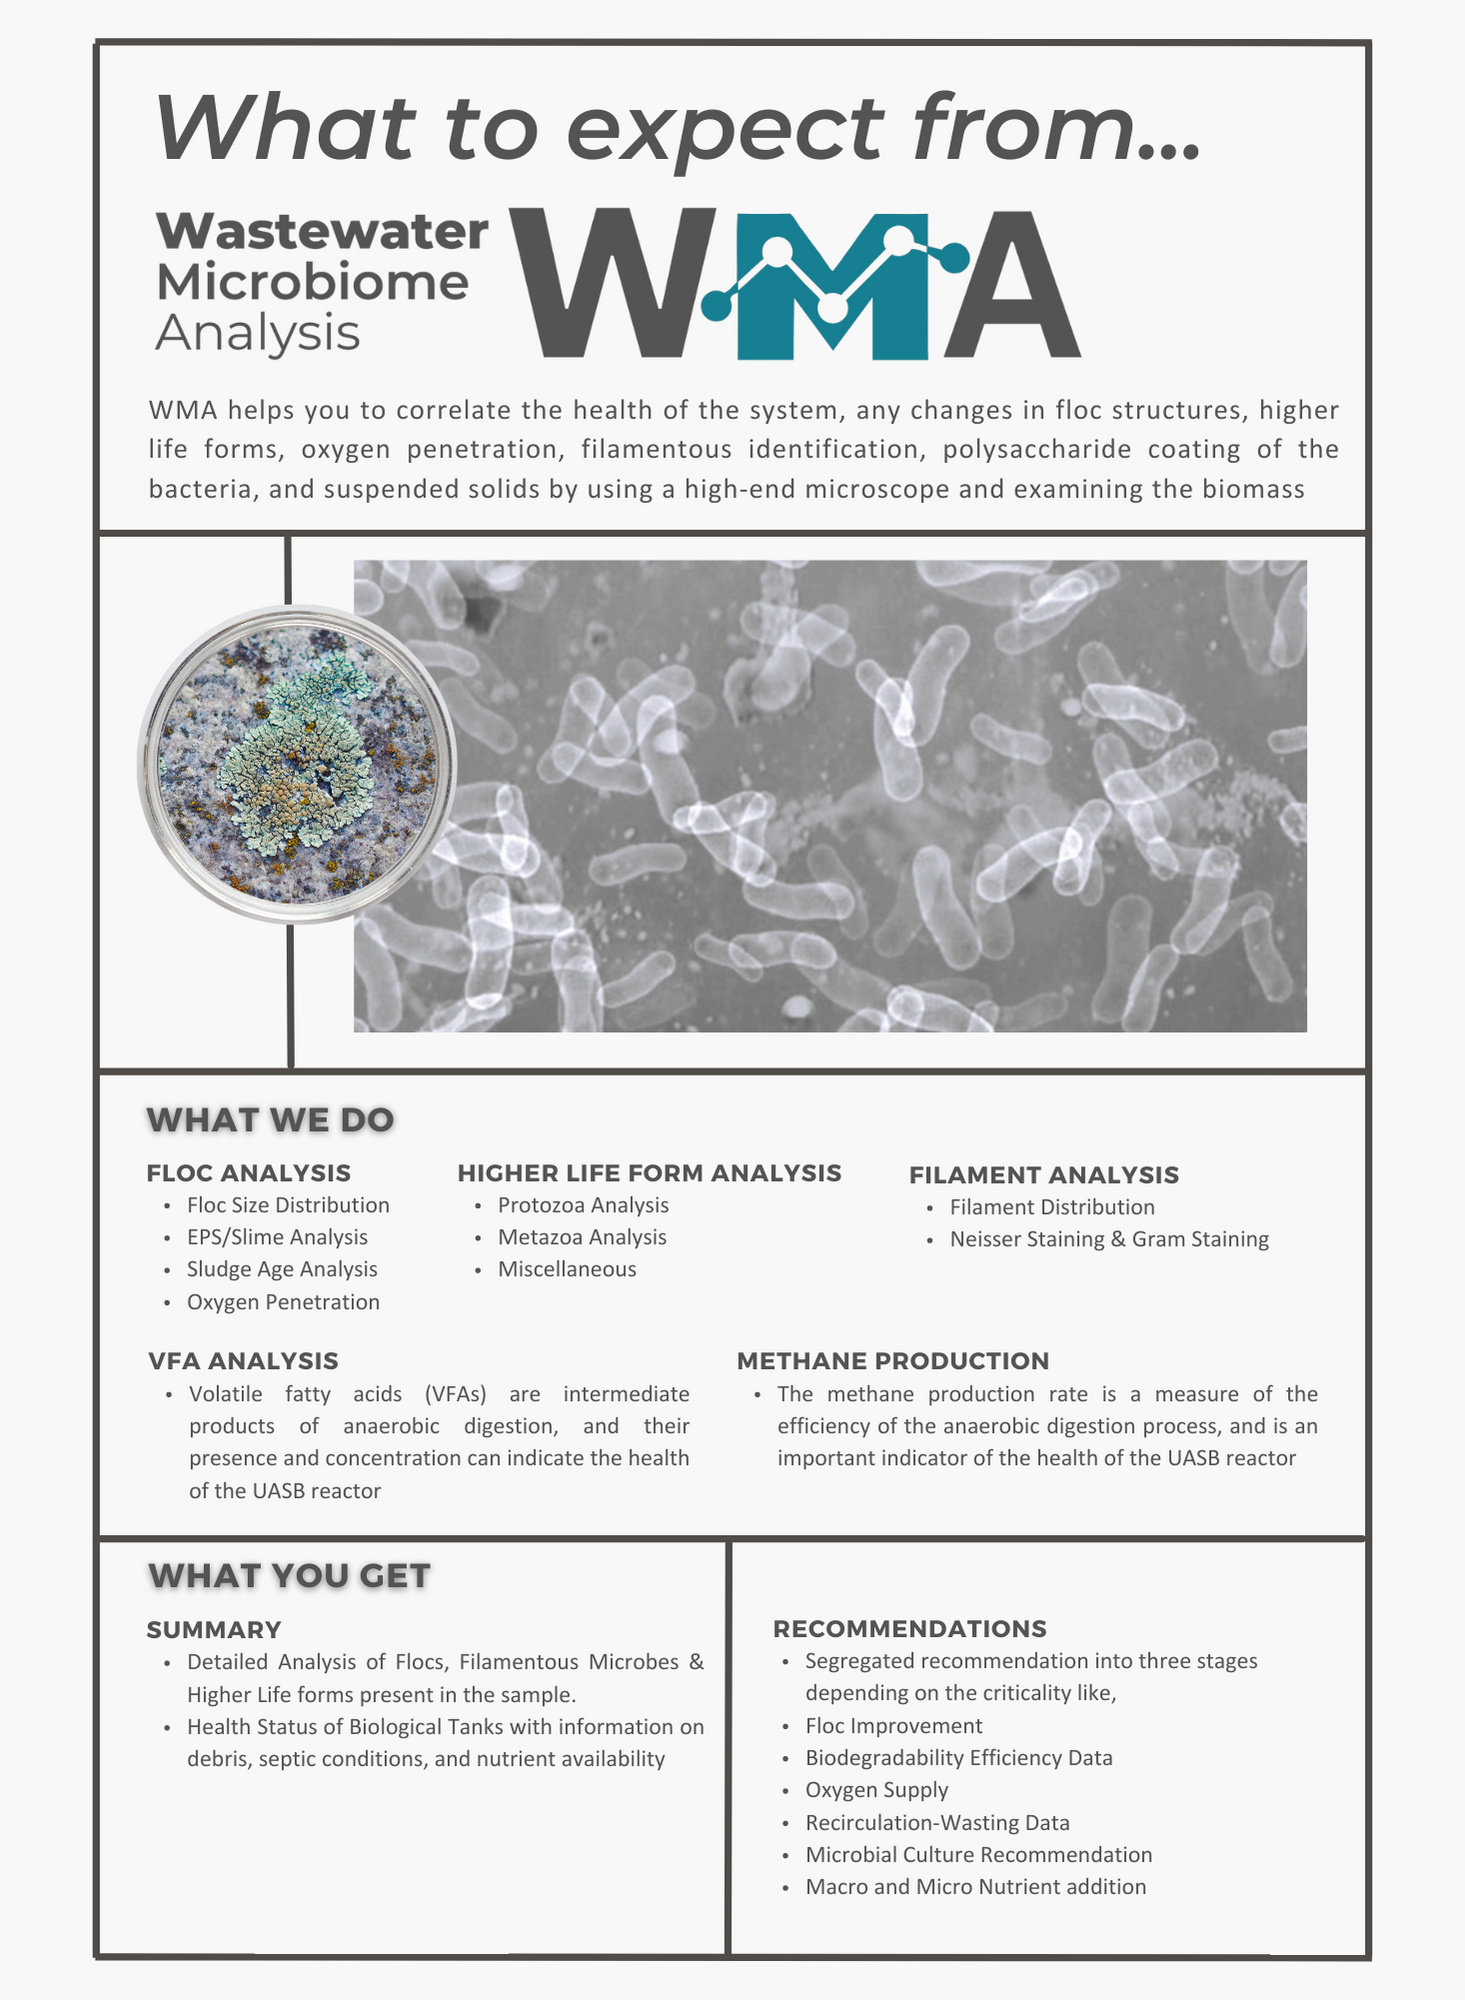 WMA helps you to correlate the health of the system, any changes in floc structures, higherlife forms, oxygen penetration, filamentous identific...